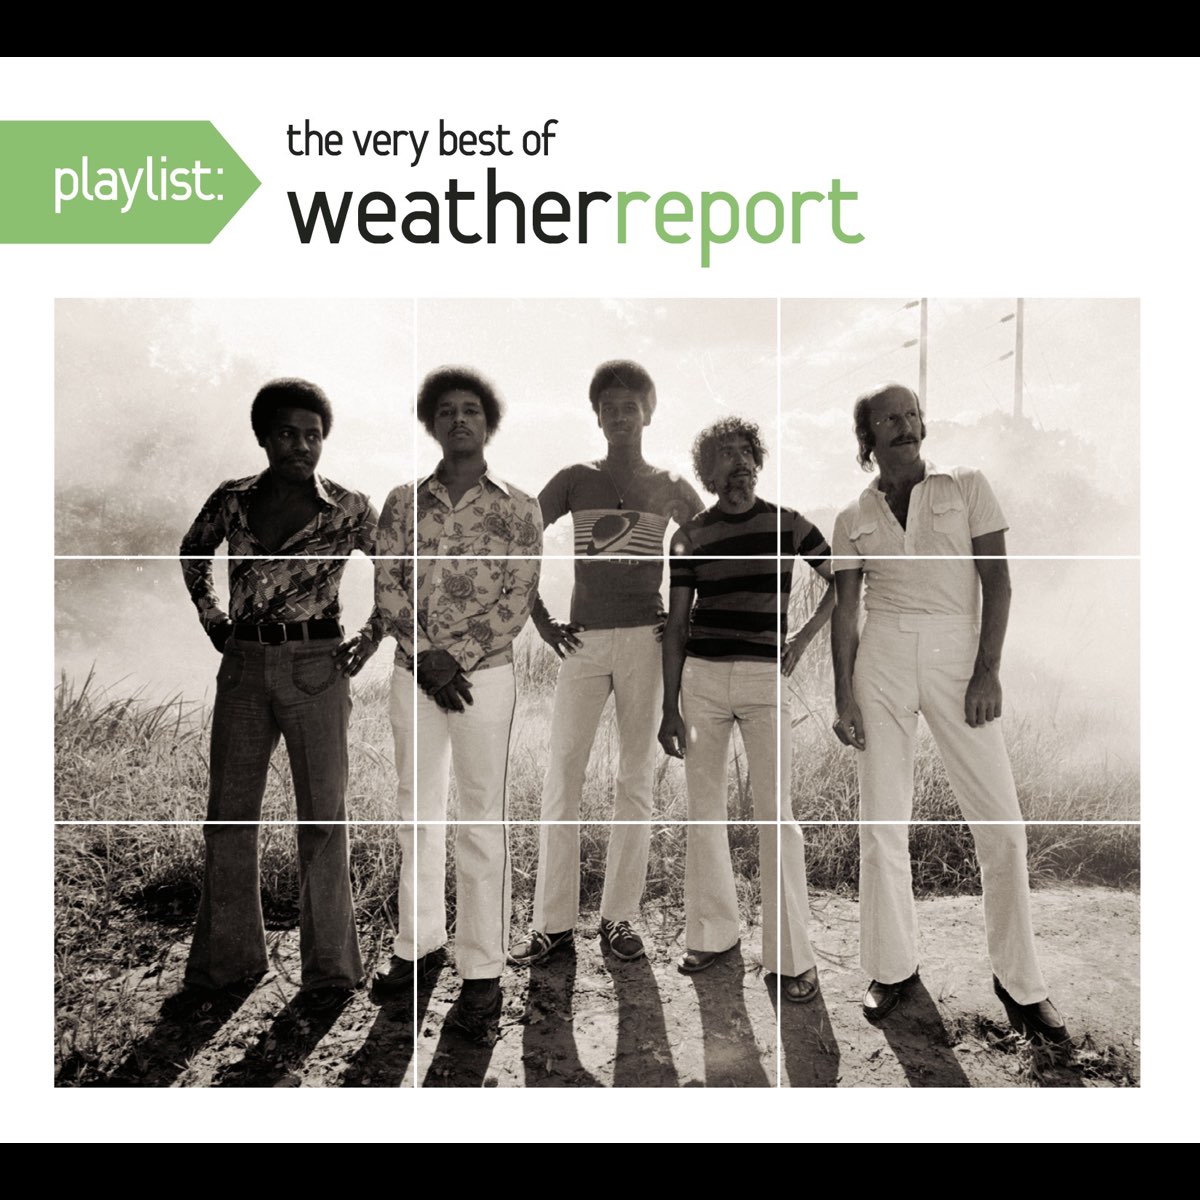 Playlist: The Very Best of Weather Report by Weather Report on iTunes